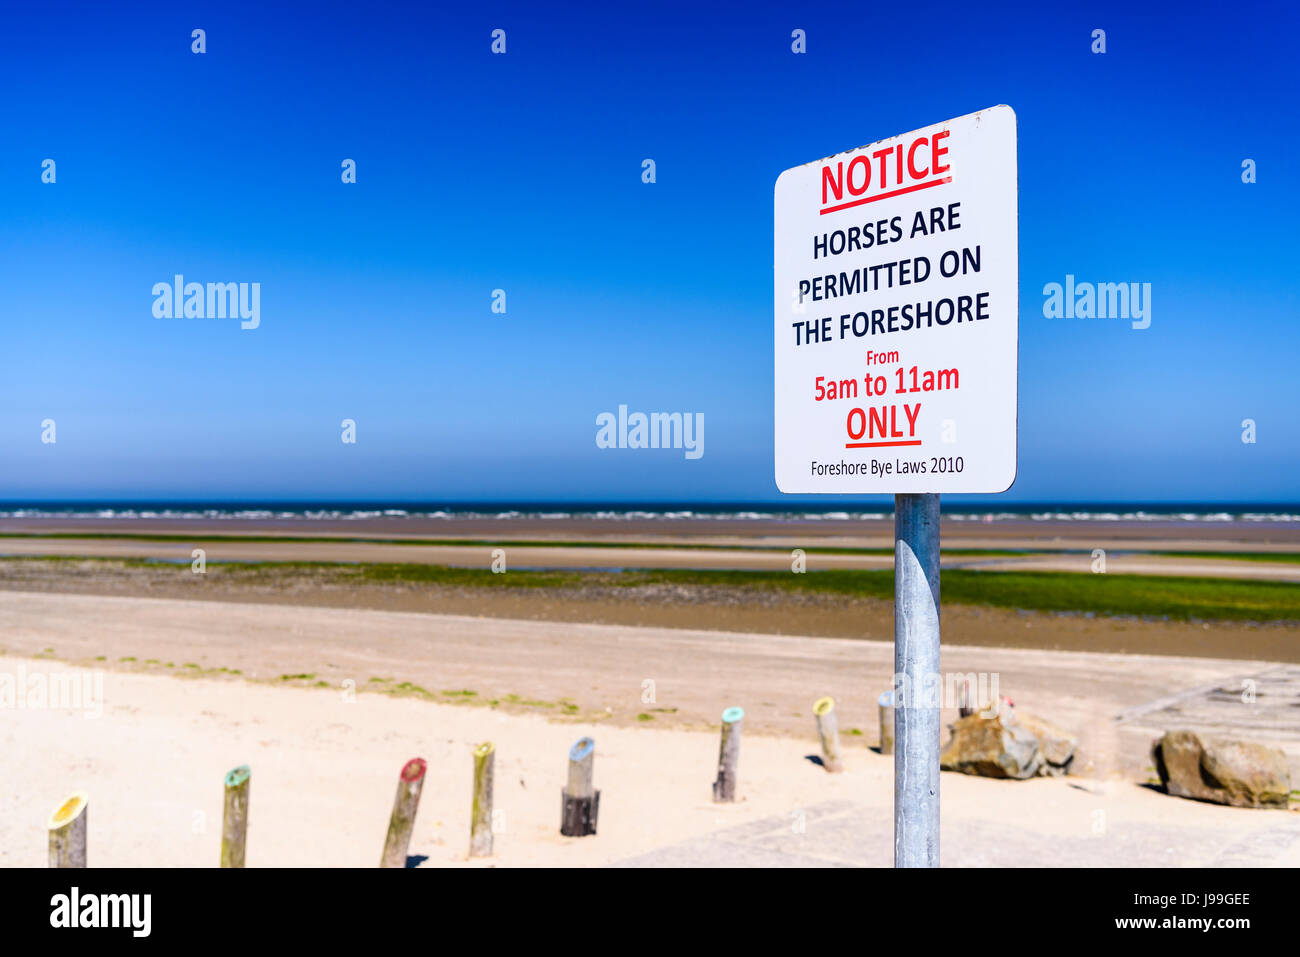 Sign at a beach, advising the public that horses are only permitted on the foreshore between 5am and 11am. Stock Photo